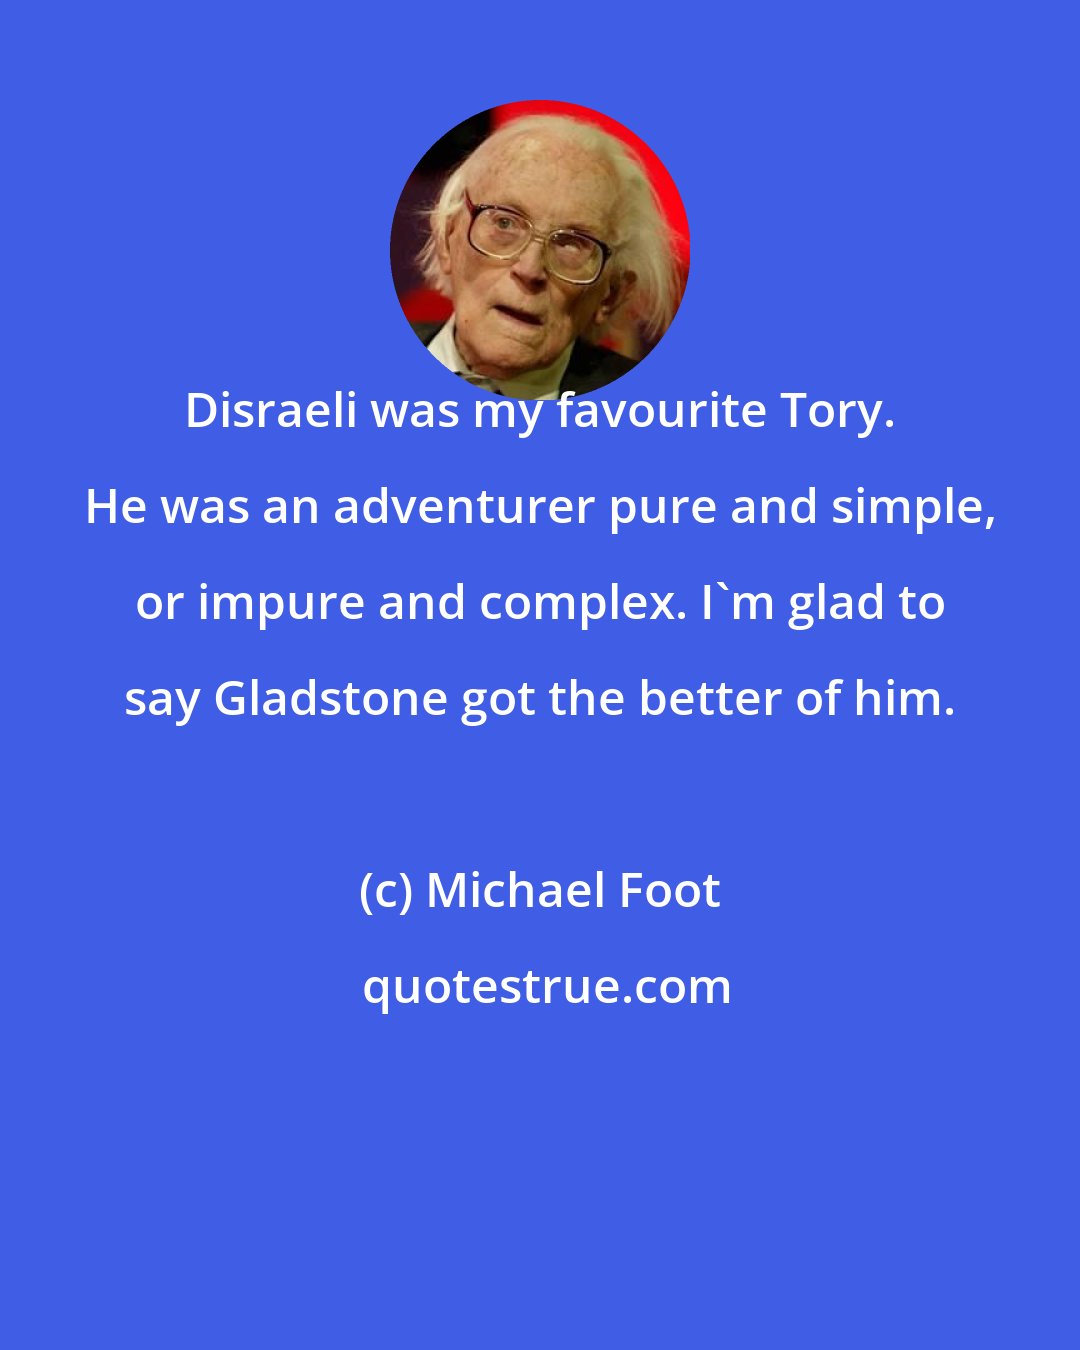 Michael Foot: Disraeli was my favourite Tory. He was an adventurer pure and simple, or impure and complex. I'm glad to say Gladstone got the better of him.